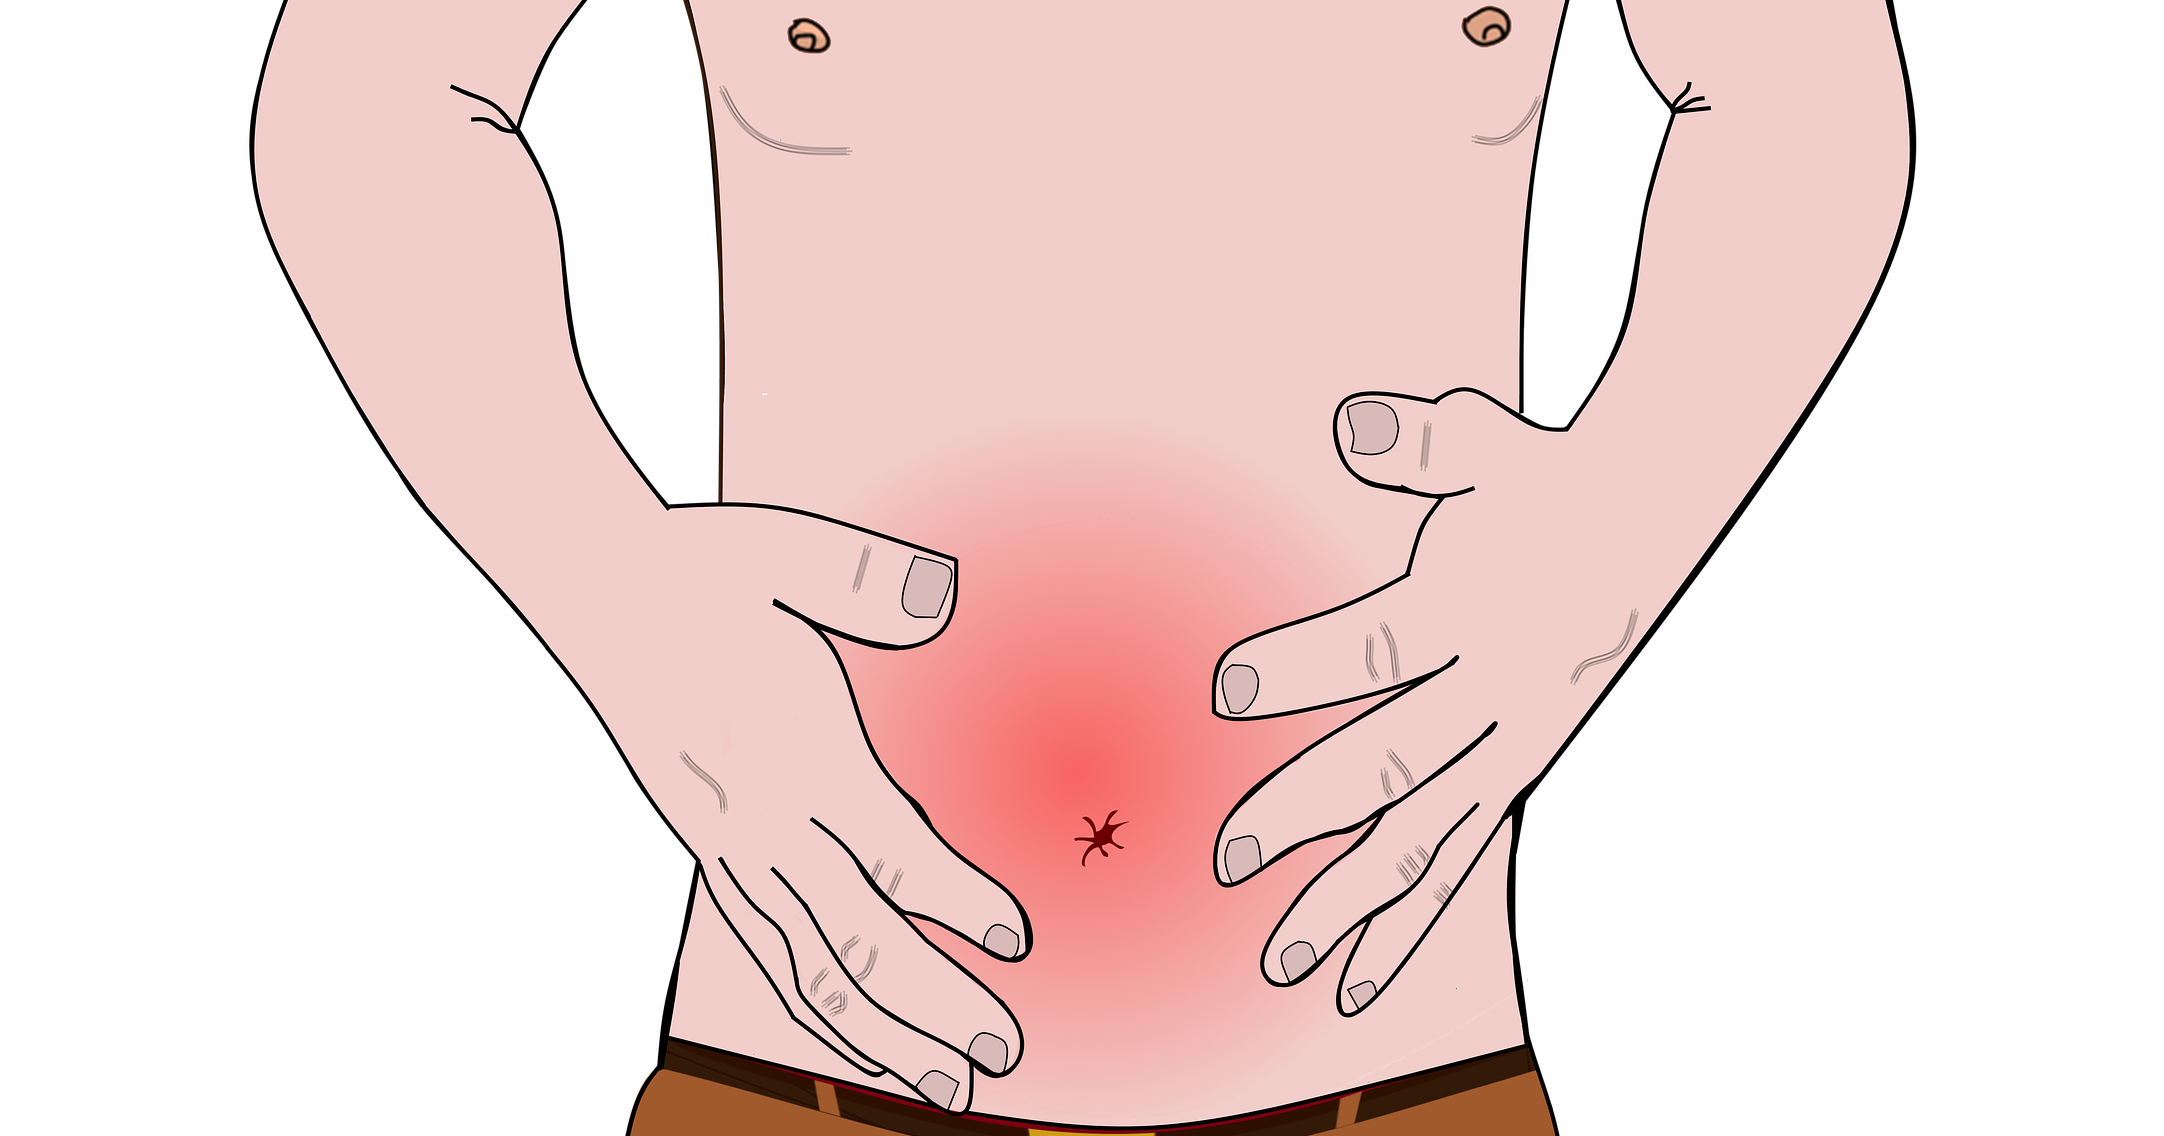 On-going constipation is a common problem today and can be a large burden the liver, gallbladder and other digestive organs. Constipation is a manifestation of the ecosystem of the digestive tract being out of balance.